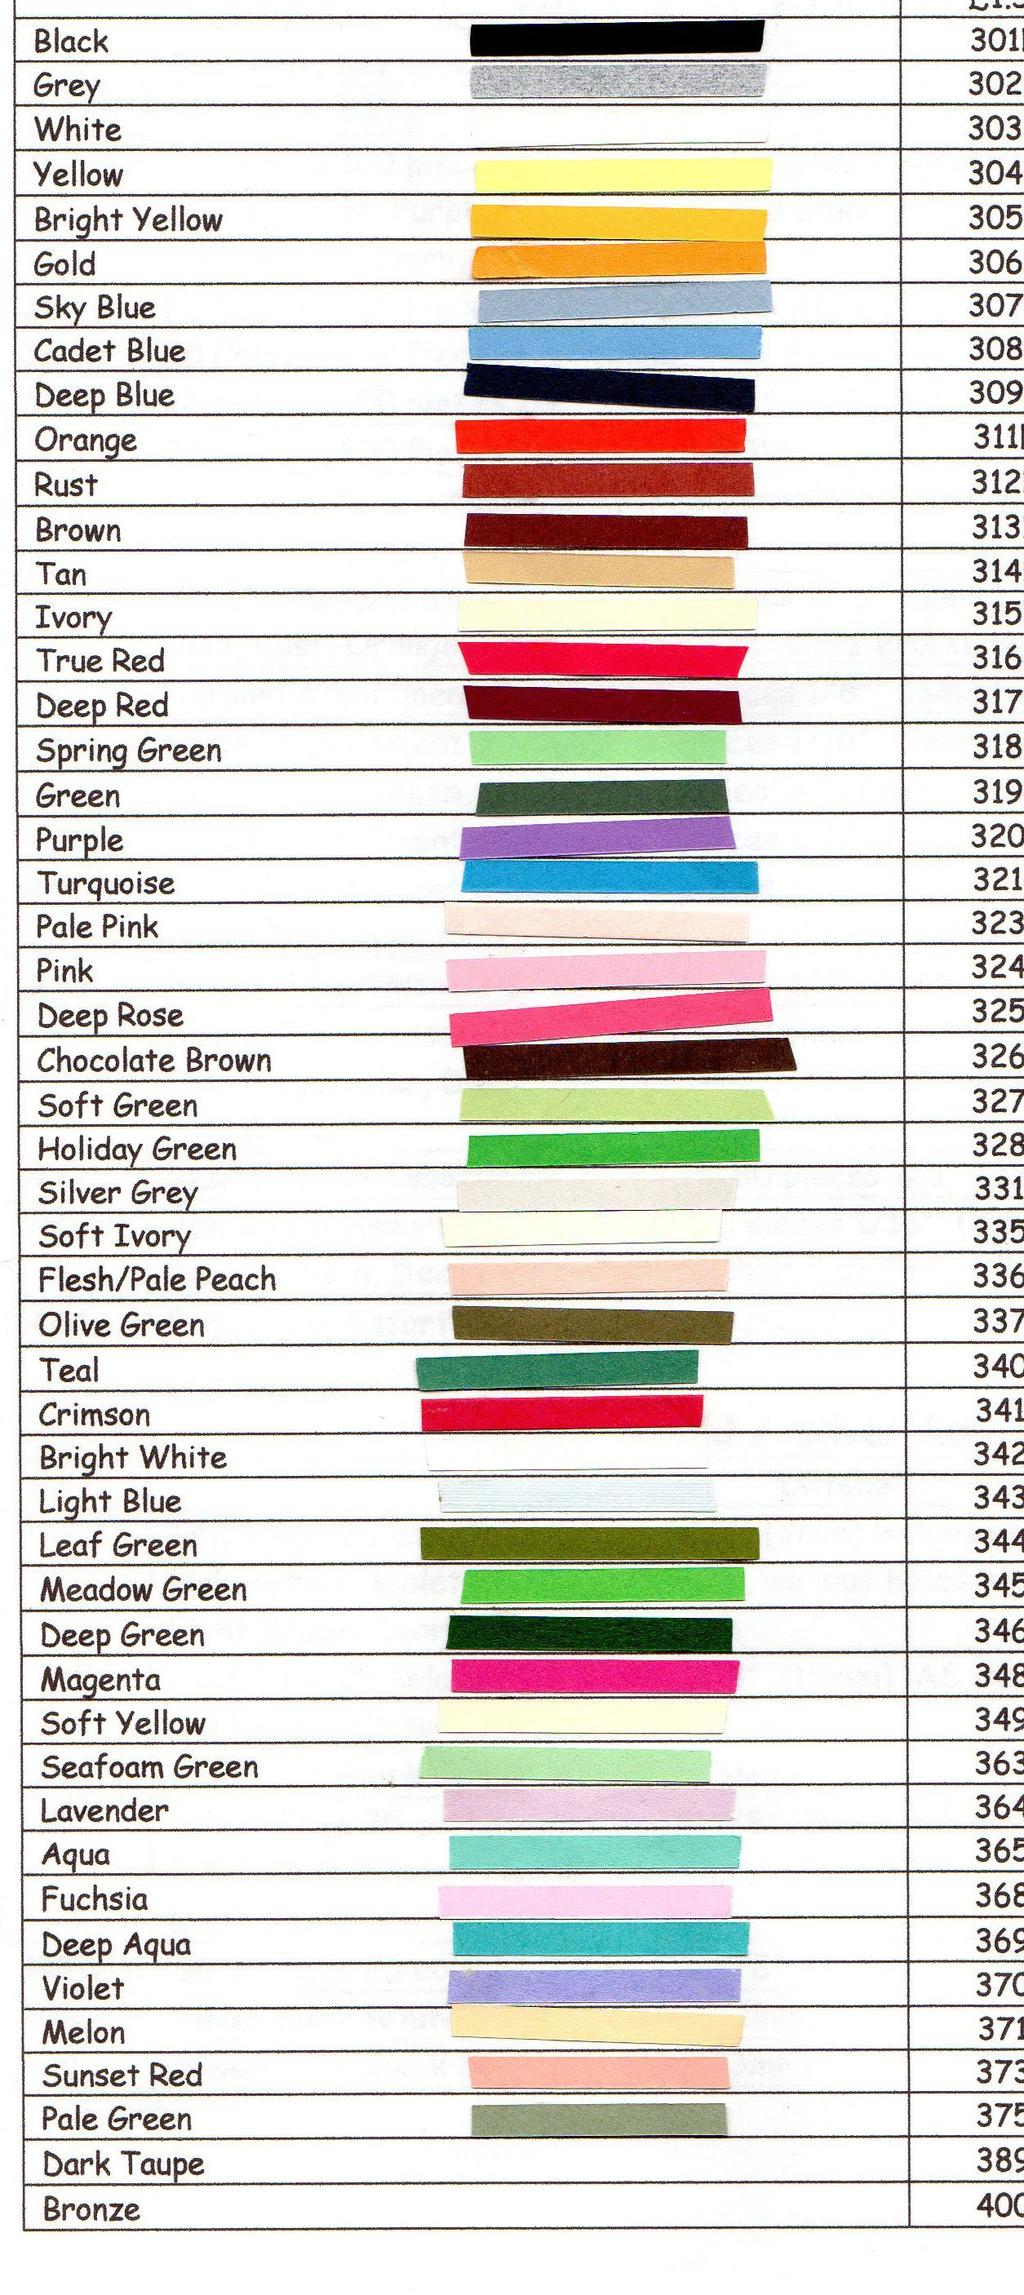 Lake City Crafts Colour Chart You can order by email: elderberrycrafts@btinternet.com or telephone 01362 851544, or by post.